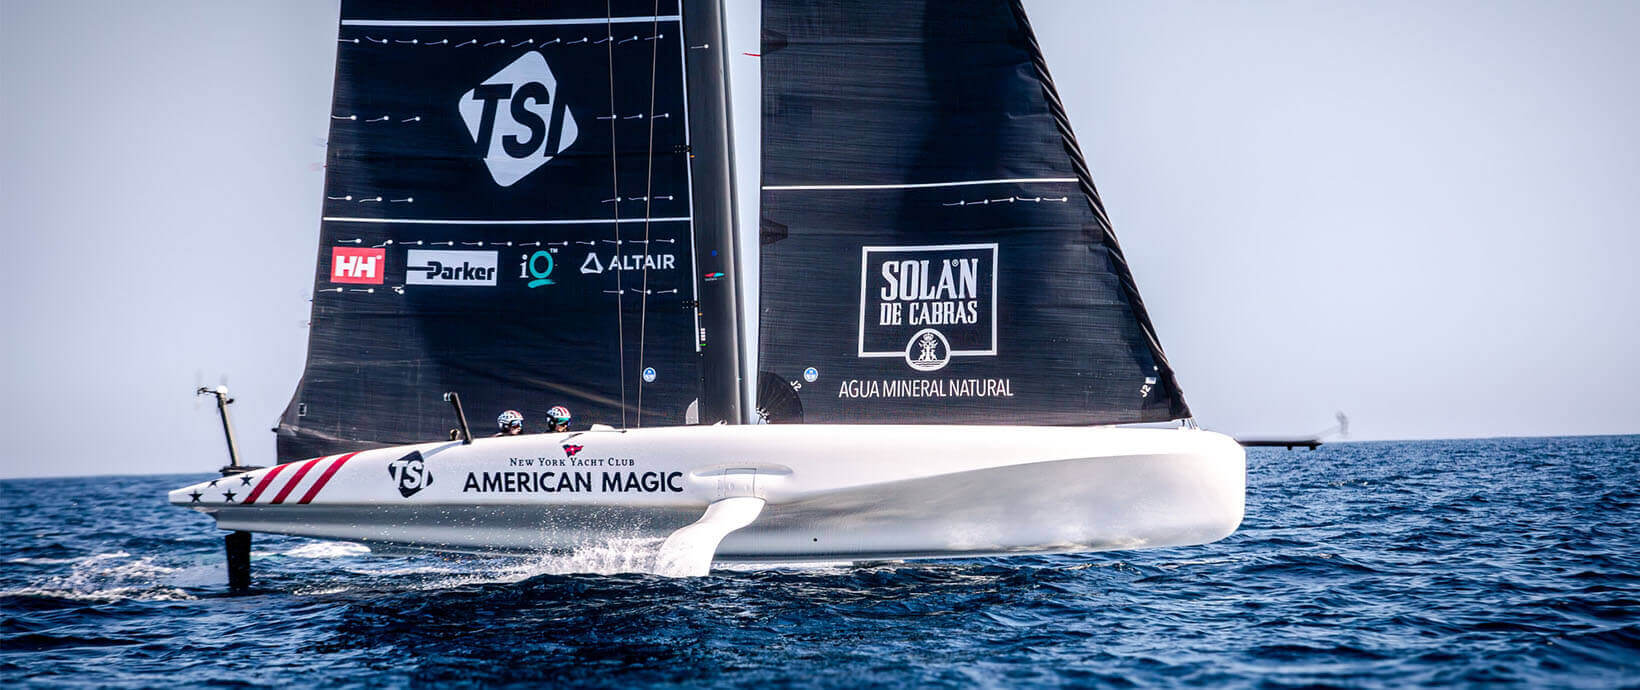 Altair and American Magic: Data Analytics Drives Innovation in the 37th America’s Cup